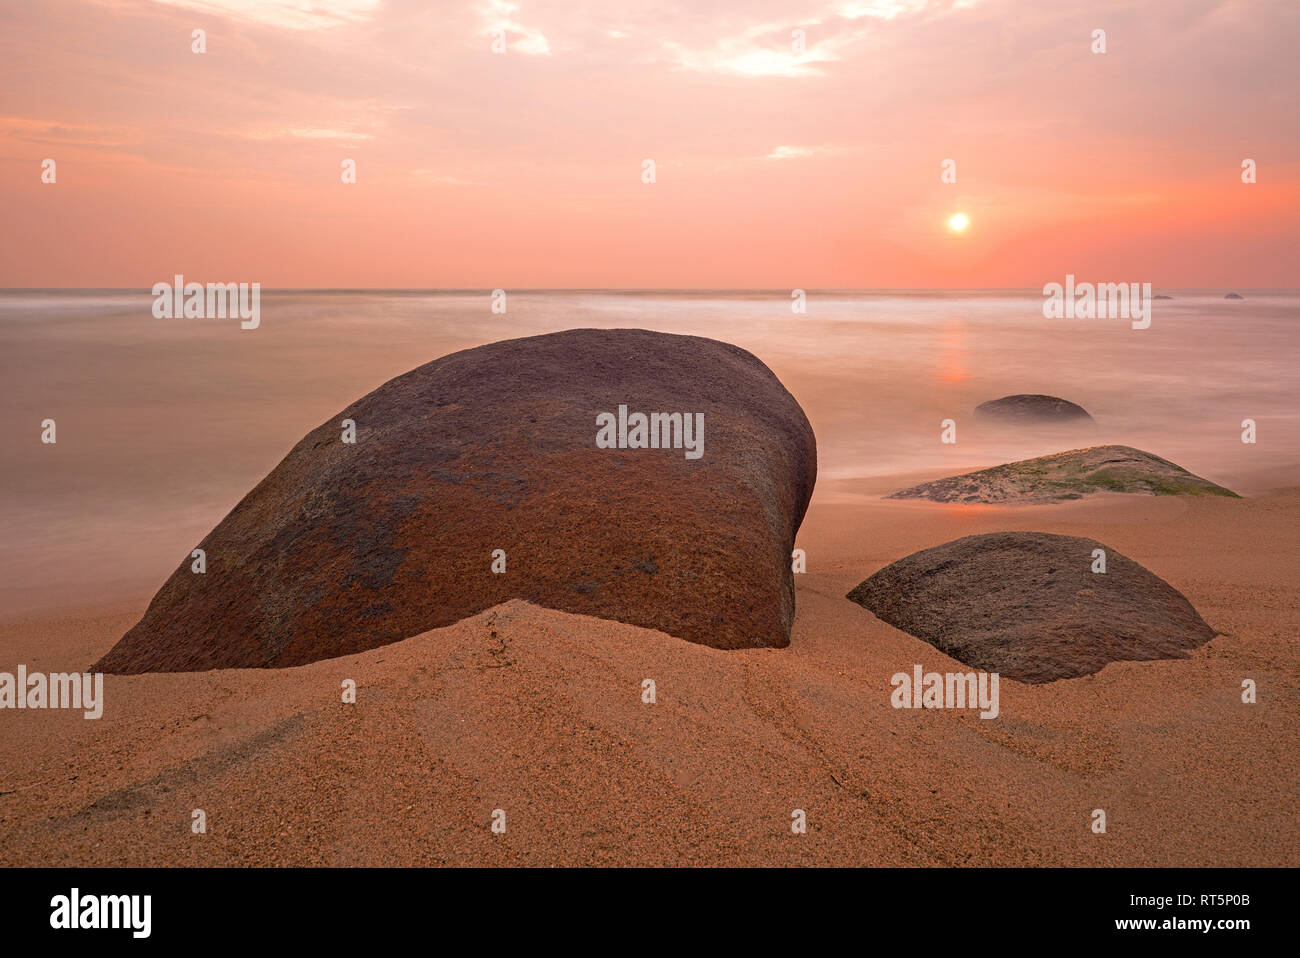 Long exposure photograph of a sunrise along the beach in Tayrona national park famous for its rock boulders near Cartagena, Colombia. Stock Photo